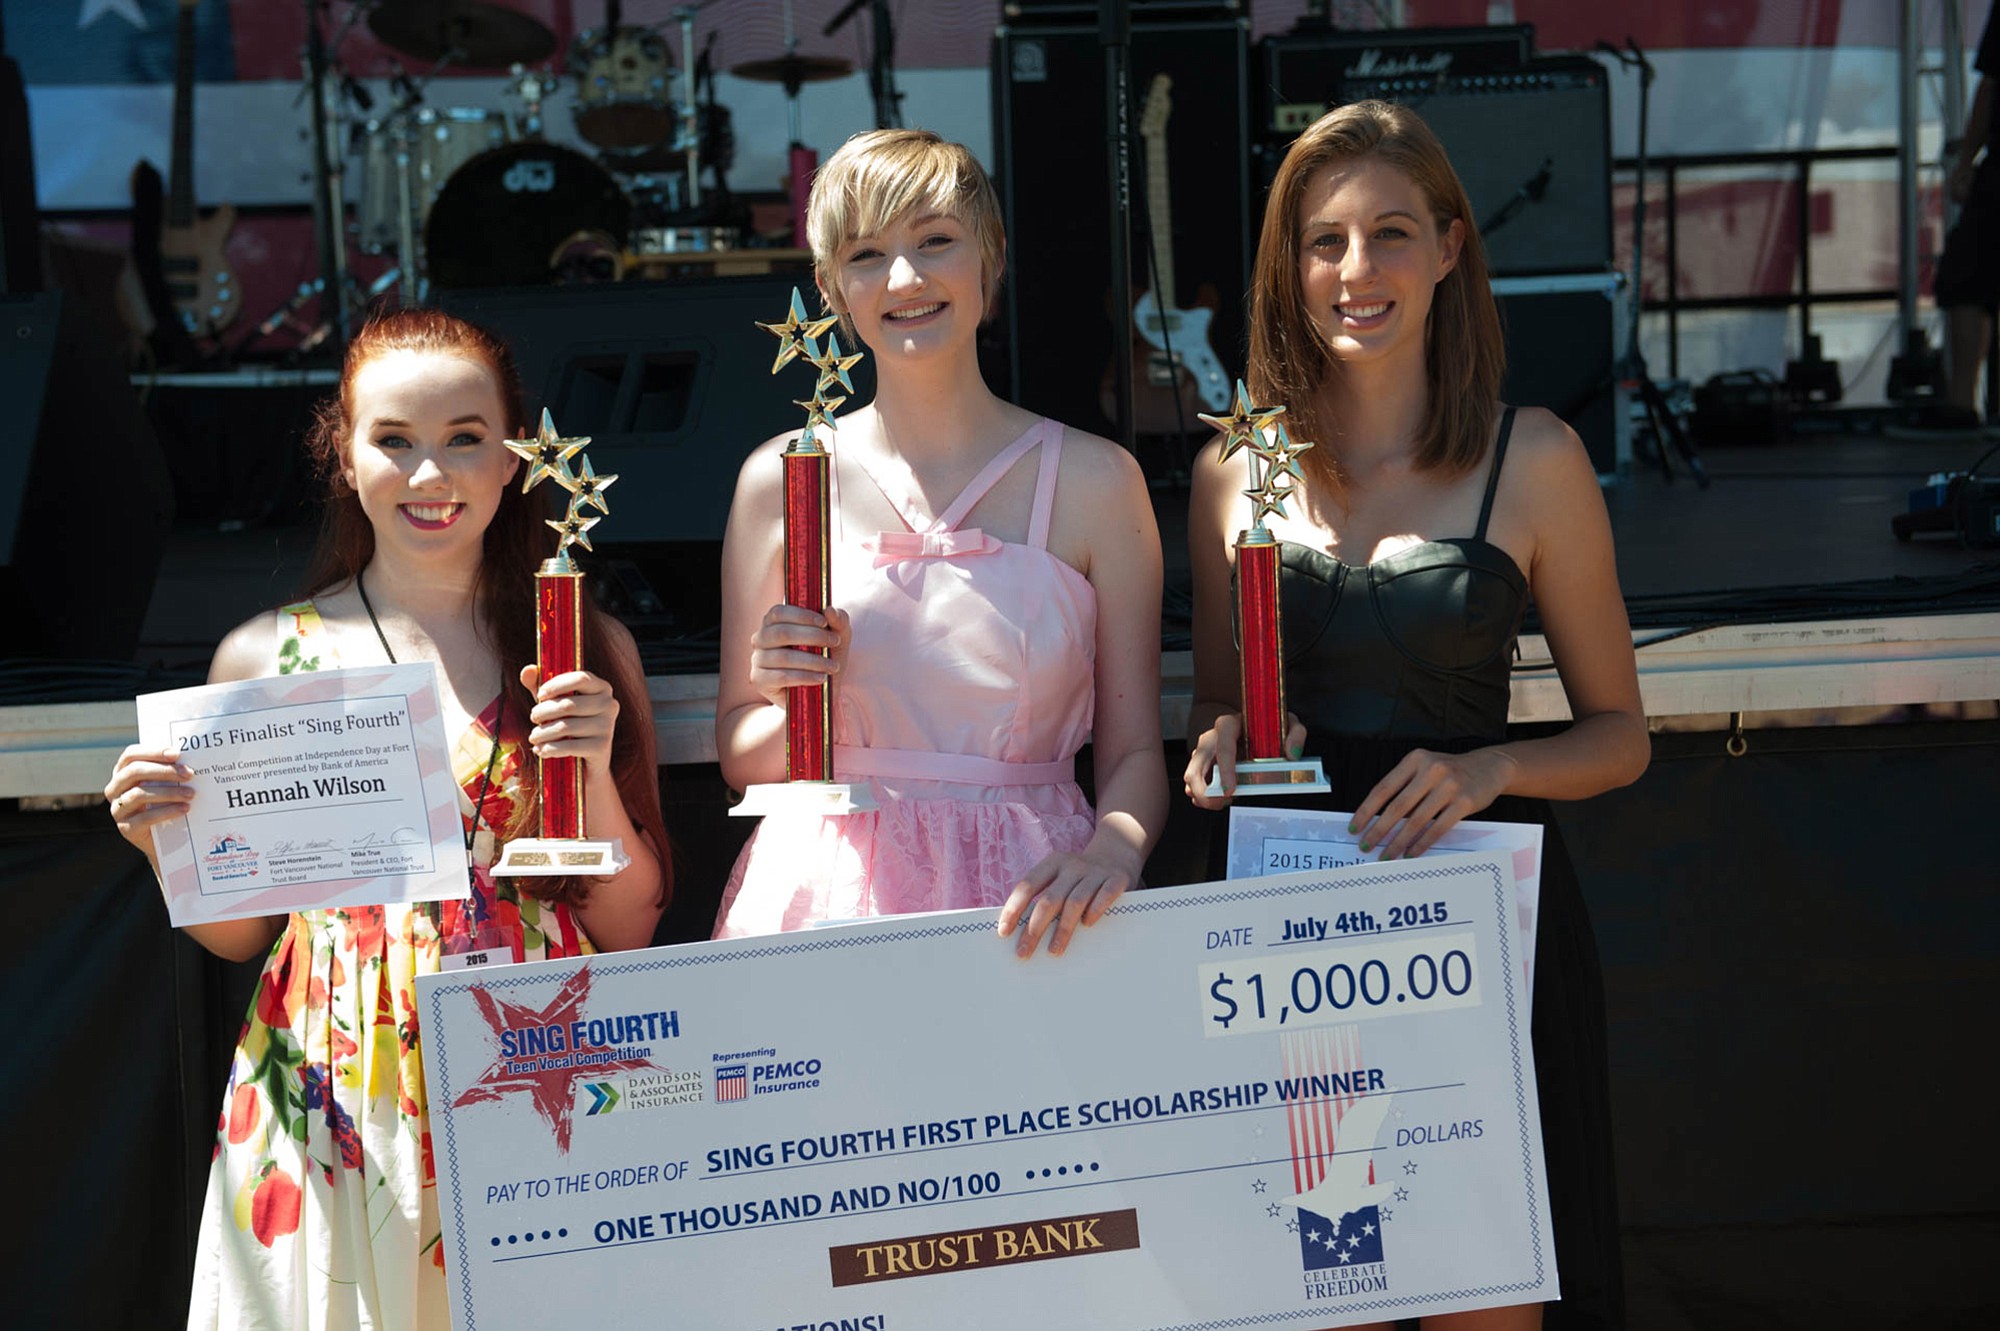 Hudson's Bay: The top three performers at Independence Day at Fort Vancouver's Sing Fourth Teen Vocal Competition, from left, Hannah Wilson, Tirza Meuljic and Mia Josberger.